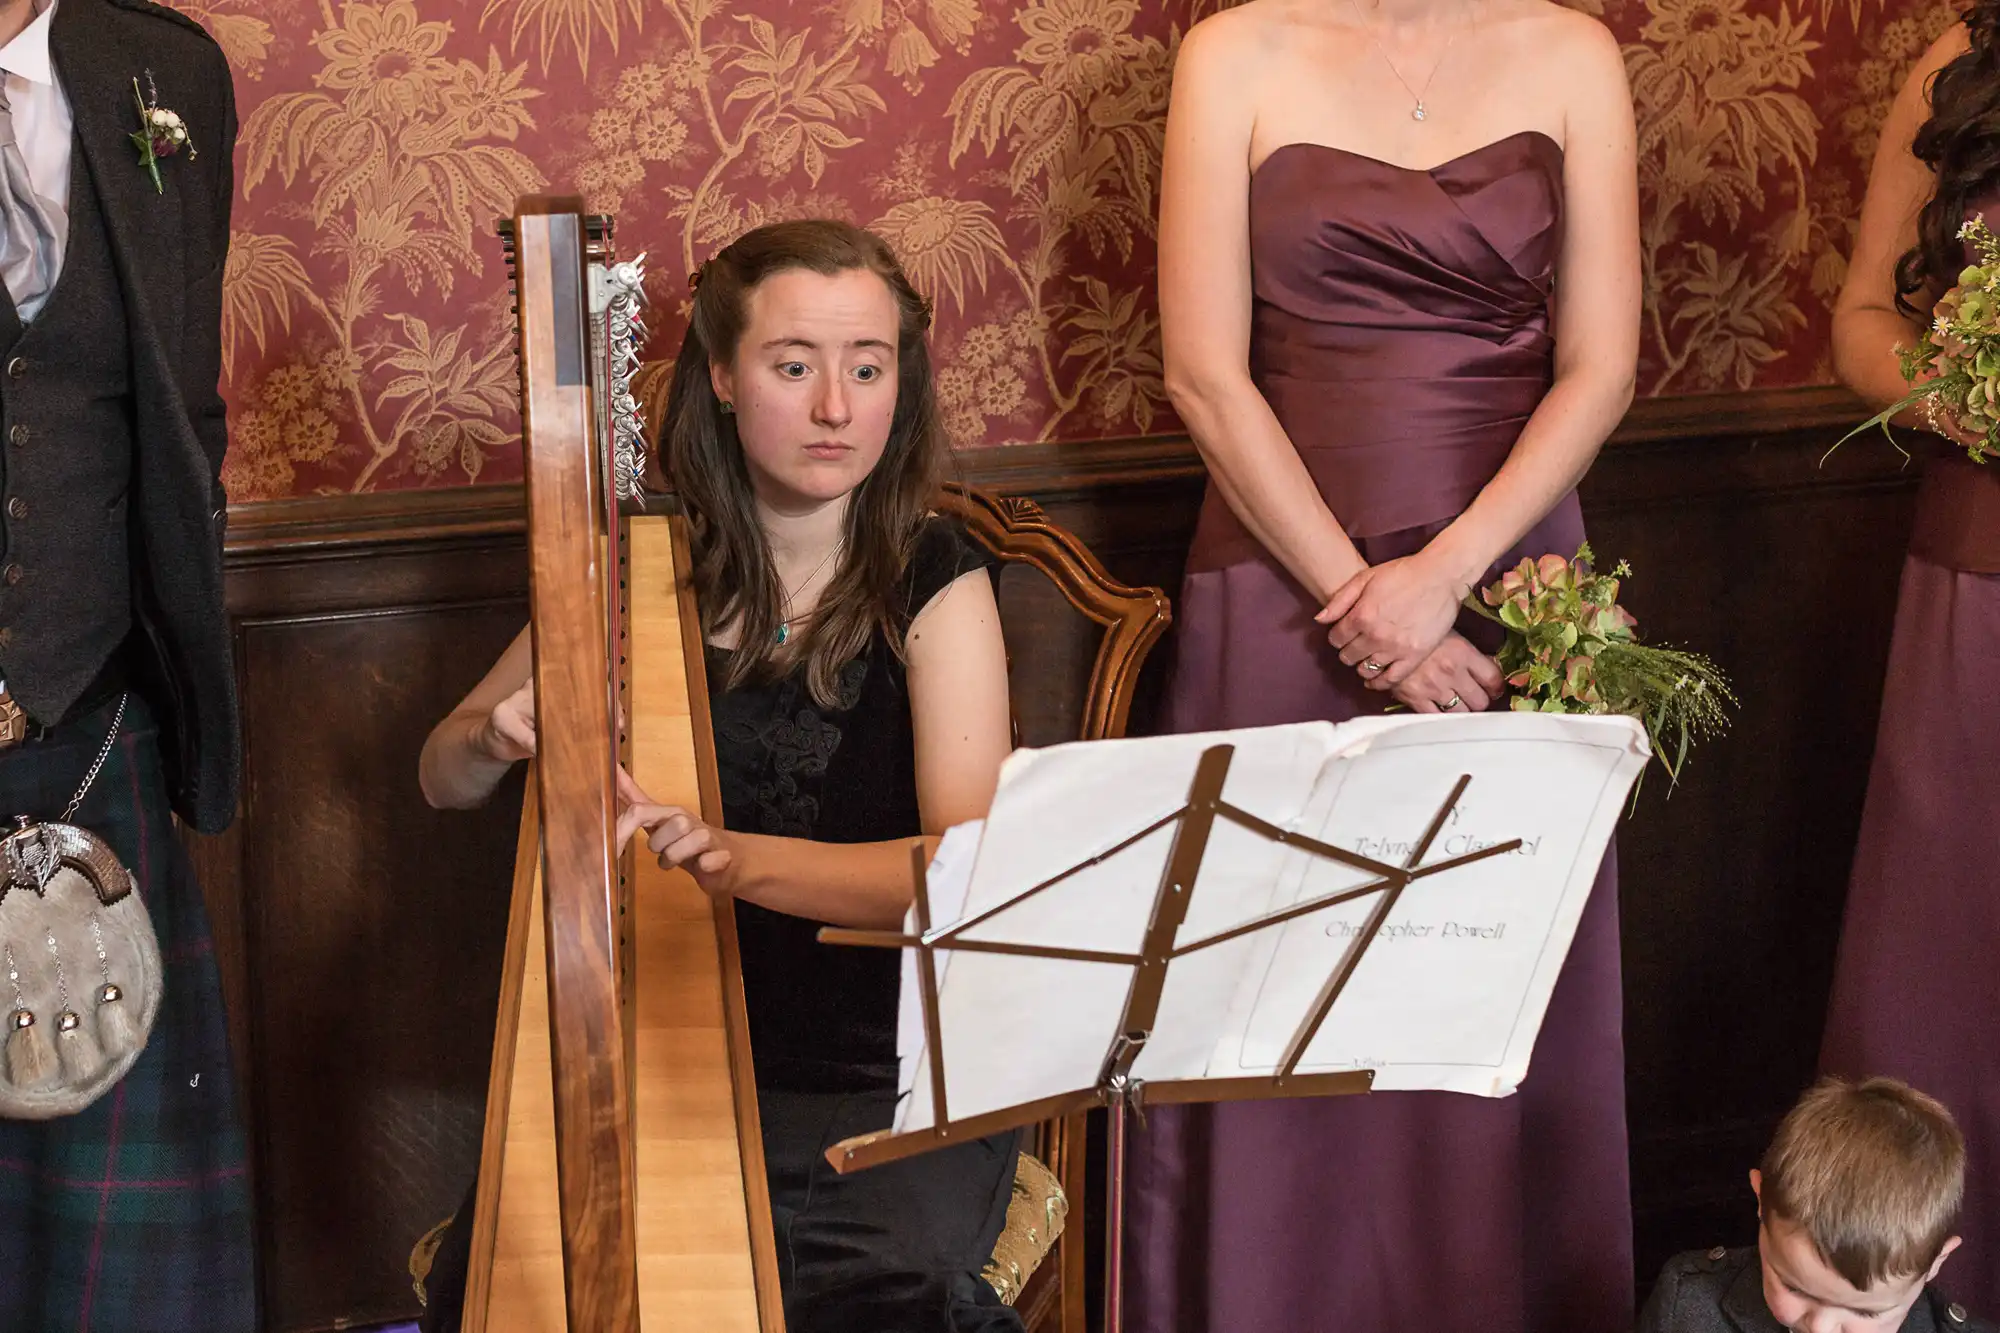 Woman in black dress playing a harp at an elegant event, with guests in formal attire observing the performance.